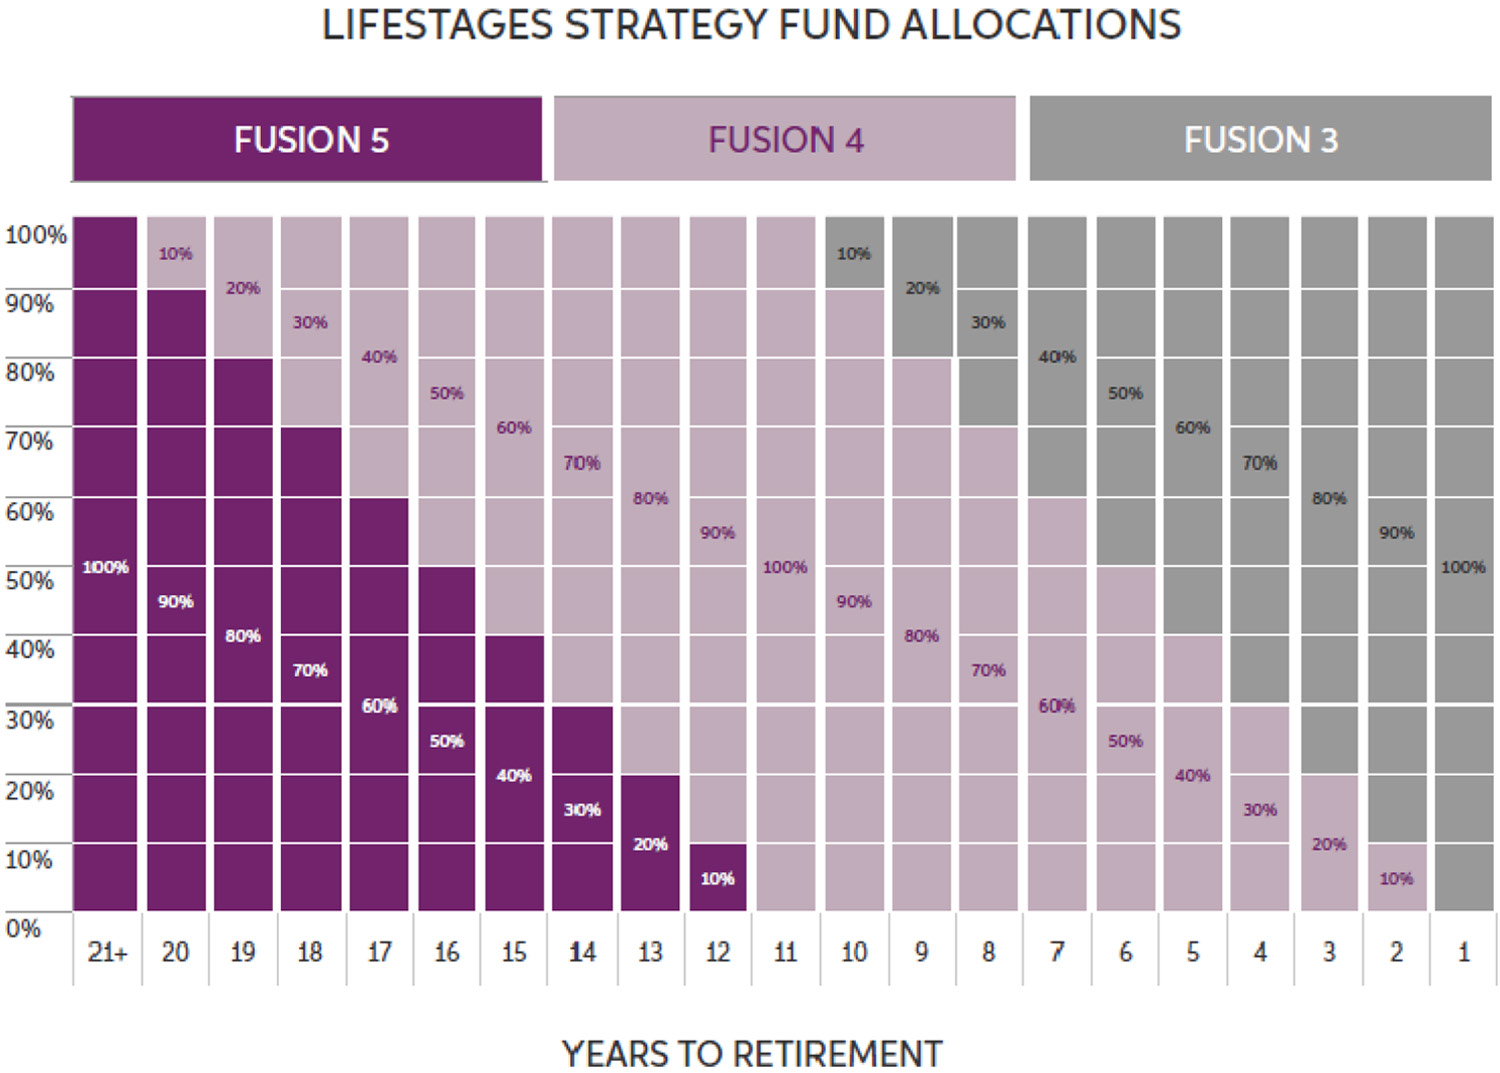 Lifestages Strategy Fund Allocations table